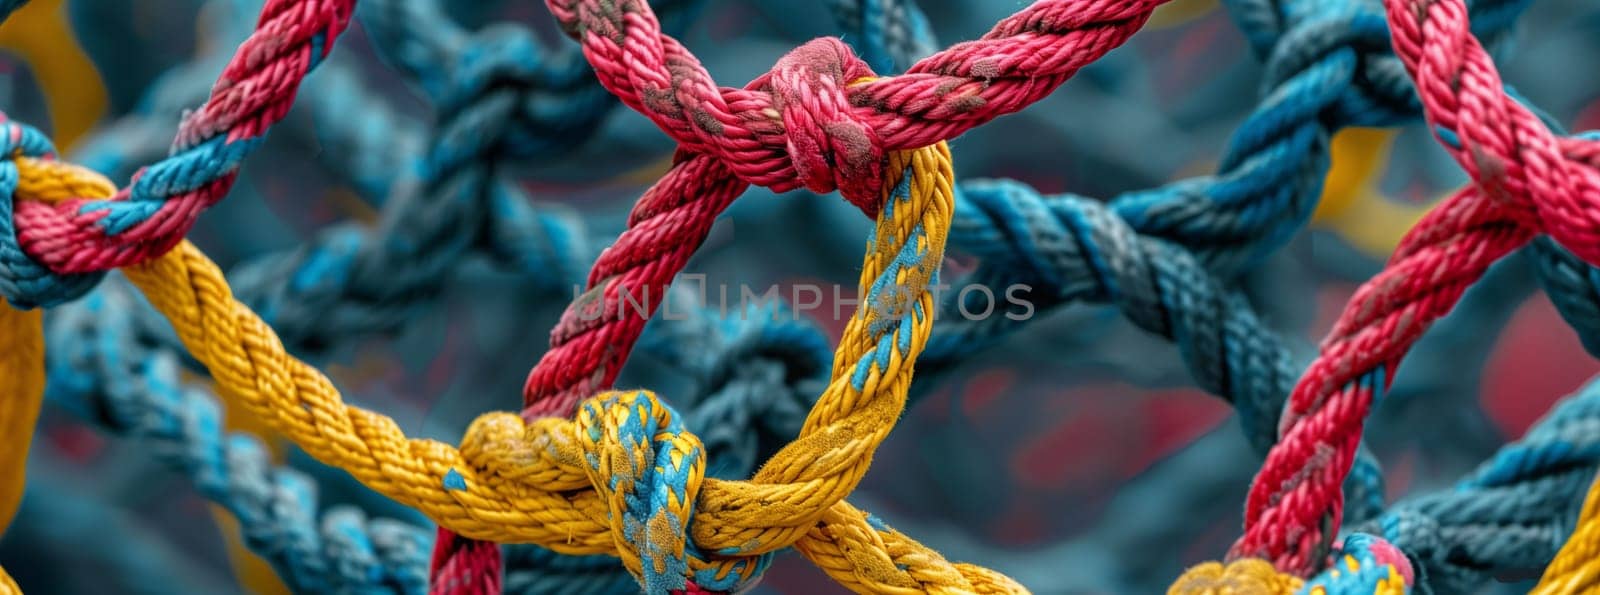 An electric blue rope net, intricately knotted, resembling a pattern found in nature. It evokes images of water, organisms, terrestrial plants, arthropods, and even fictional characters